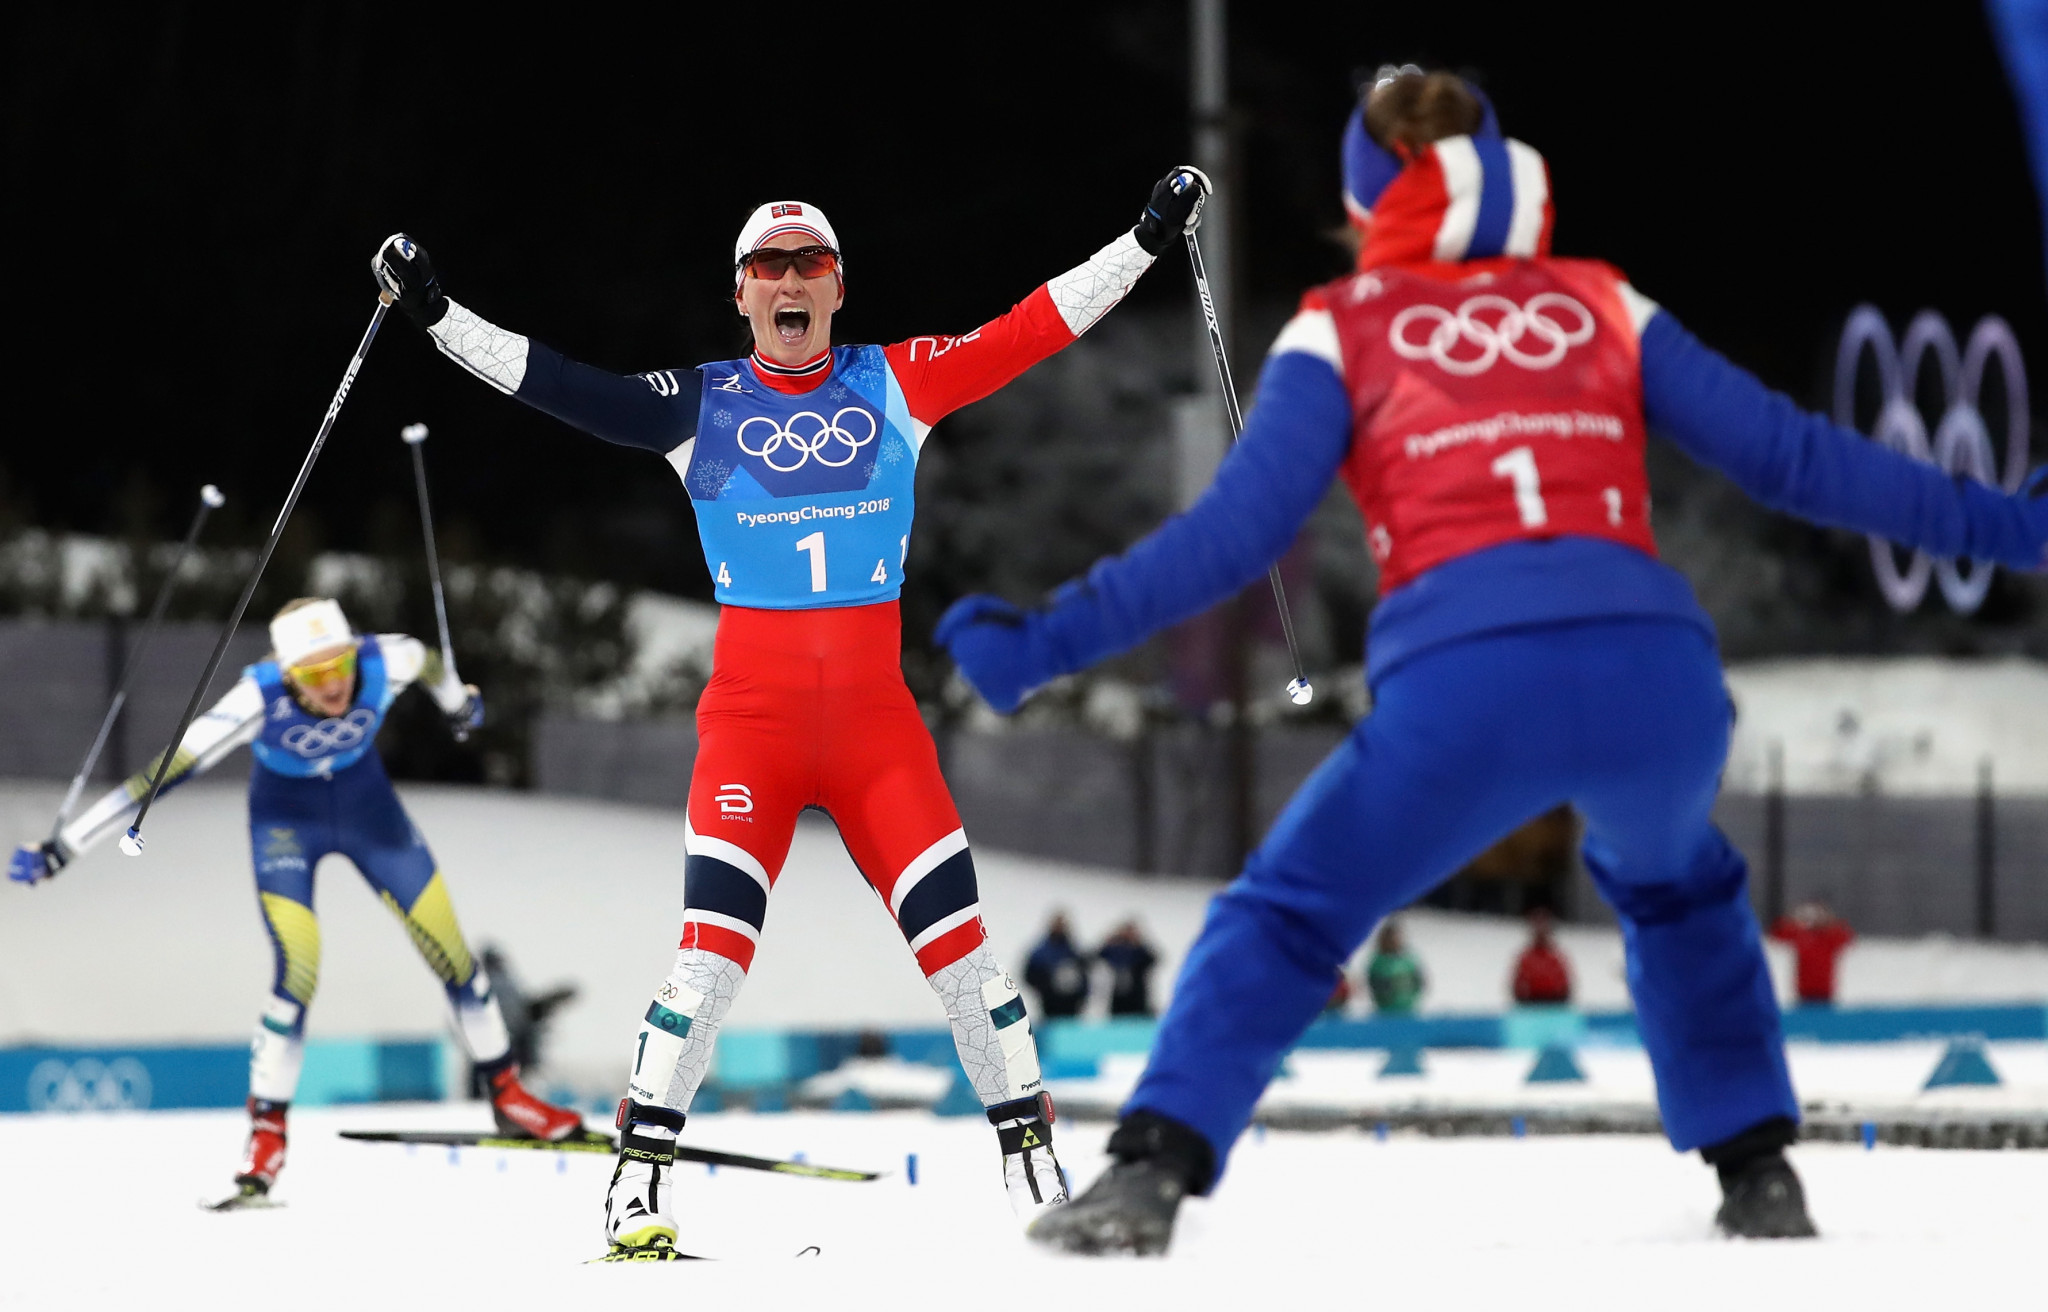 Marit Bjørgen has equalled the record for the most medals won by a Winter Olympian after anchoring Norway to victory in the women’s cross-country skiing 4x5 kilometres relay at Pyeongchang 2018 ©Getty Images